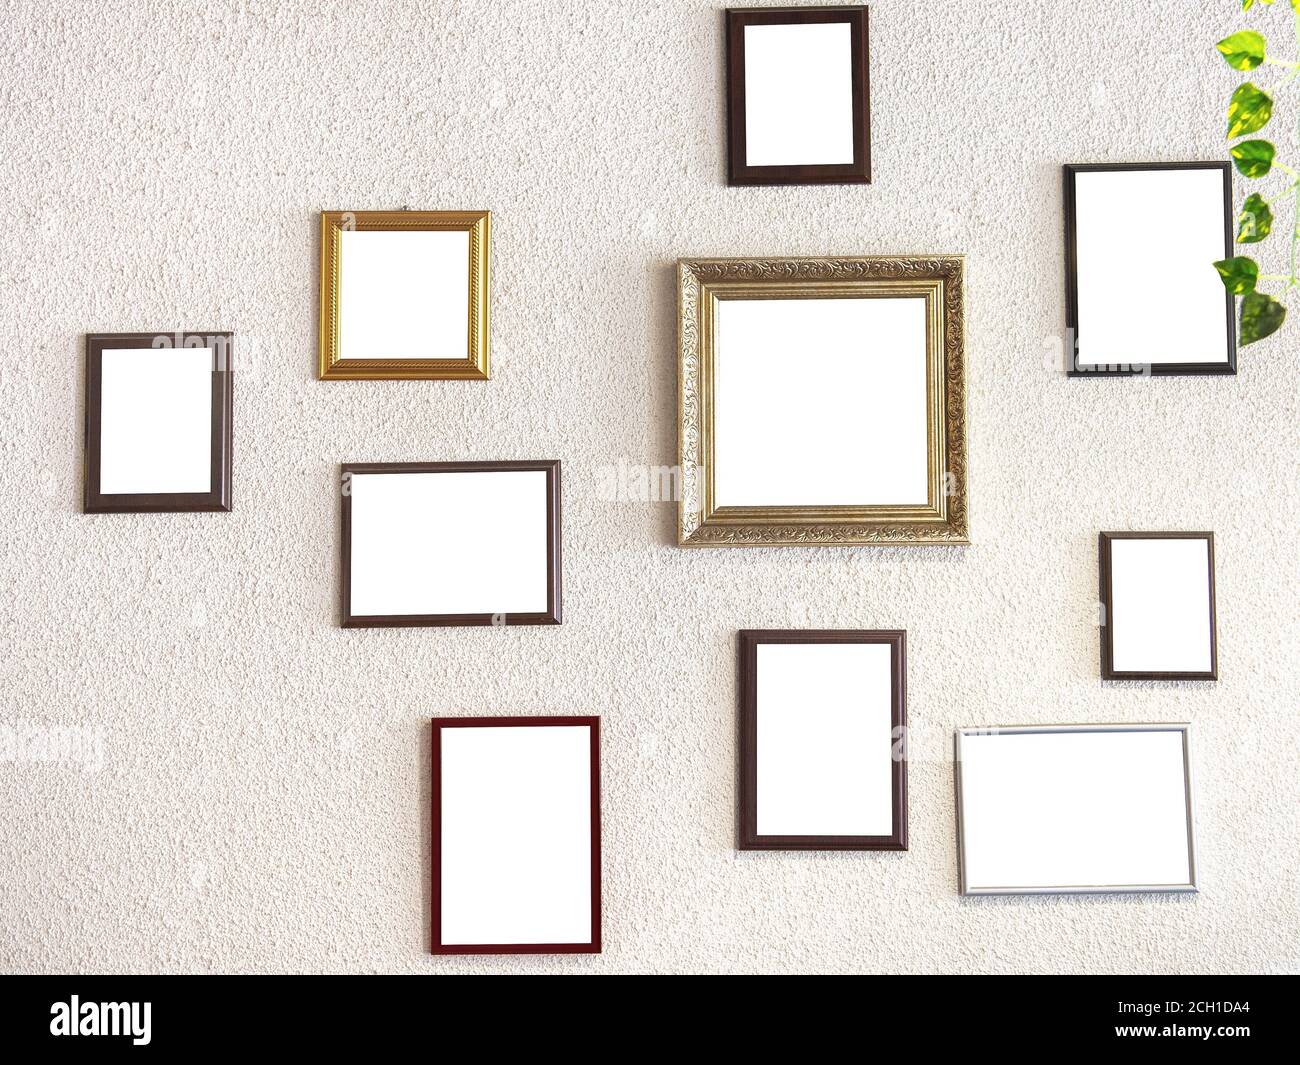 mockup image. different size picture framed hanging on the gray wall. Blank of wooden frames picture hanging on concrete wall background. Various fram Stock Photo